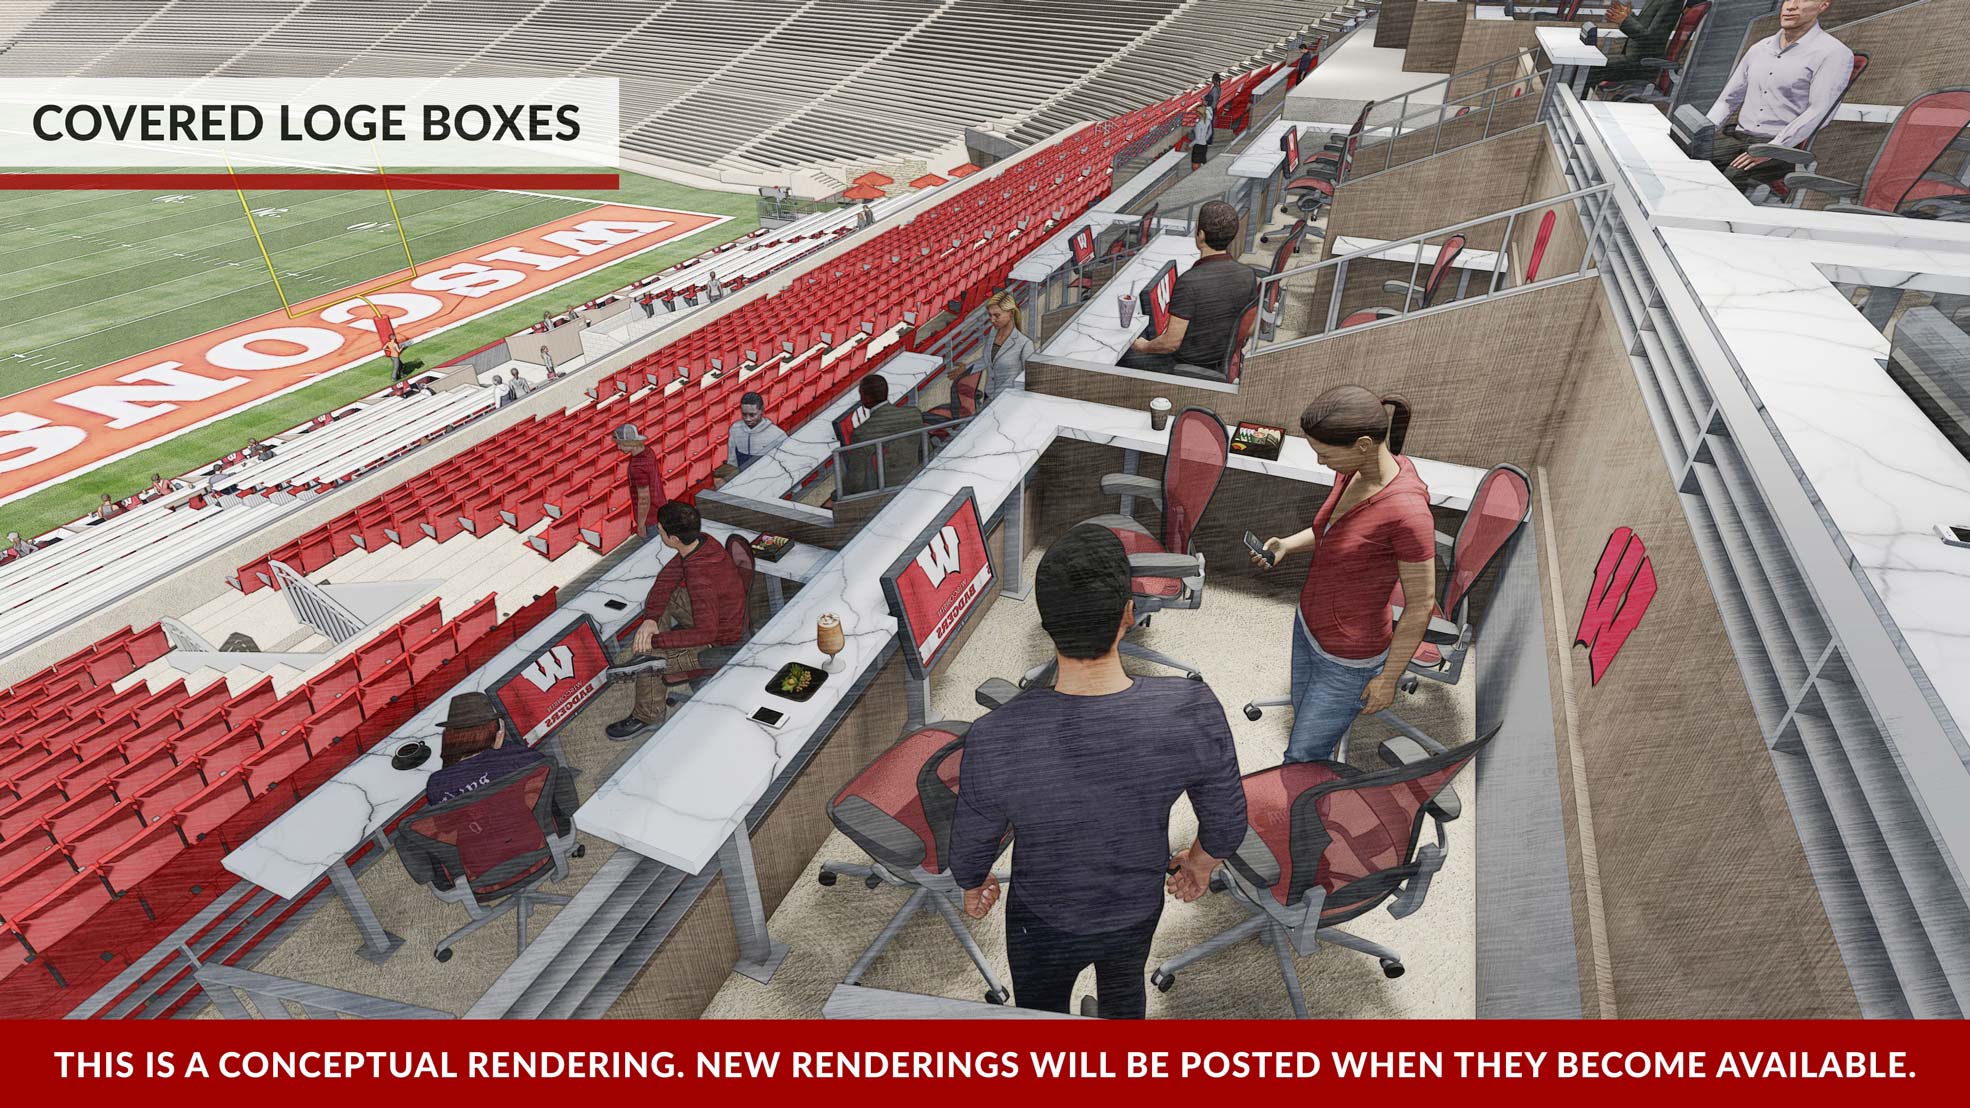 Camp Randall Stadium South End Zone Rendering From the Stands Looking Down Accross The Stands To the Opposite Corner With a View of the individual outdoor private box areas.